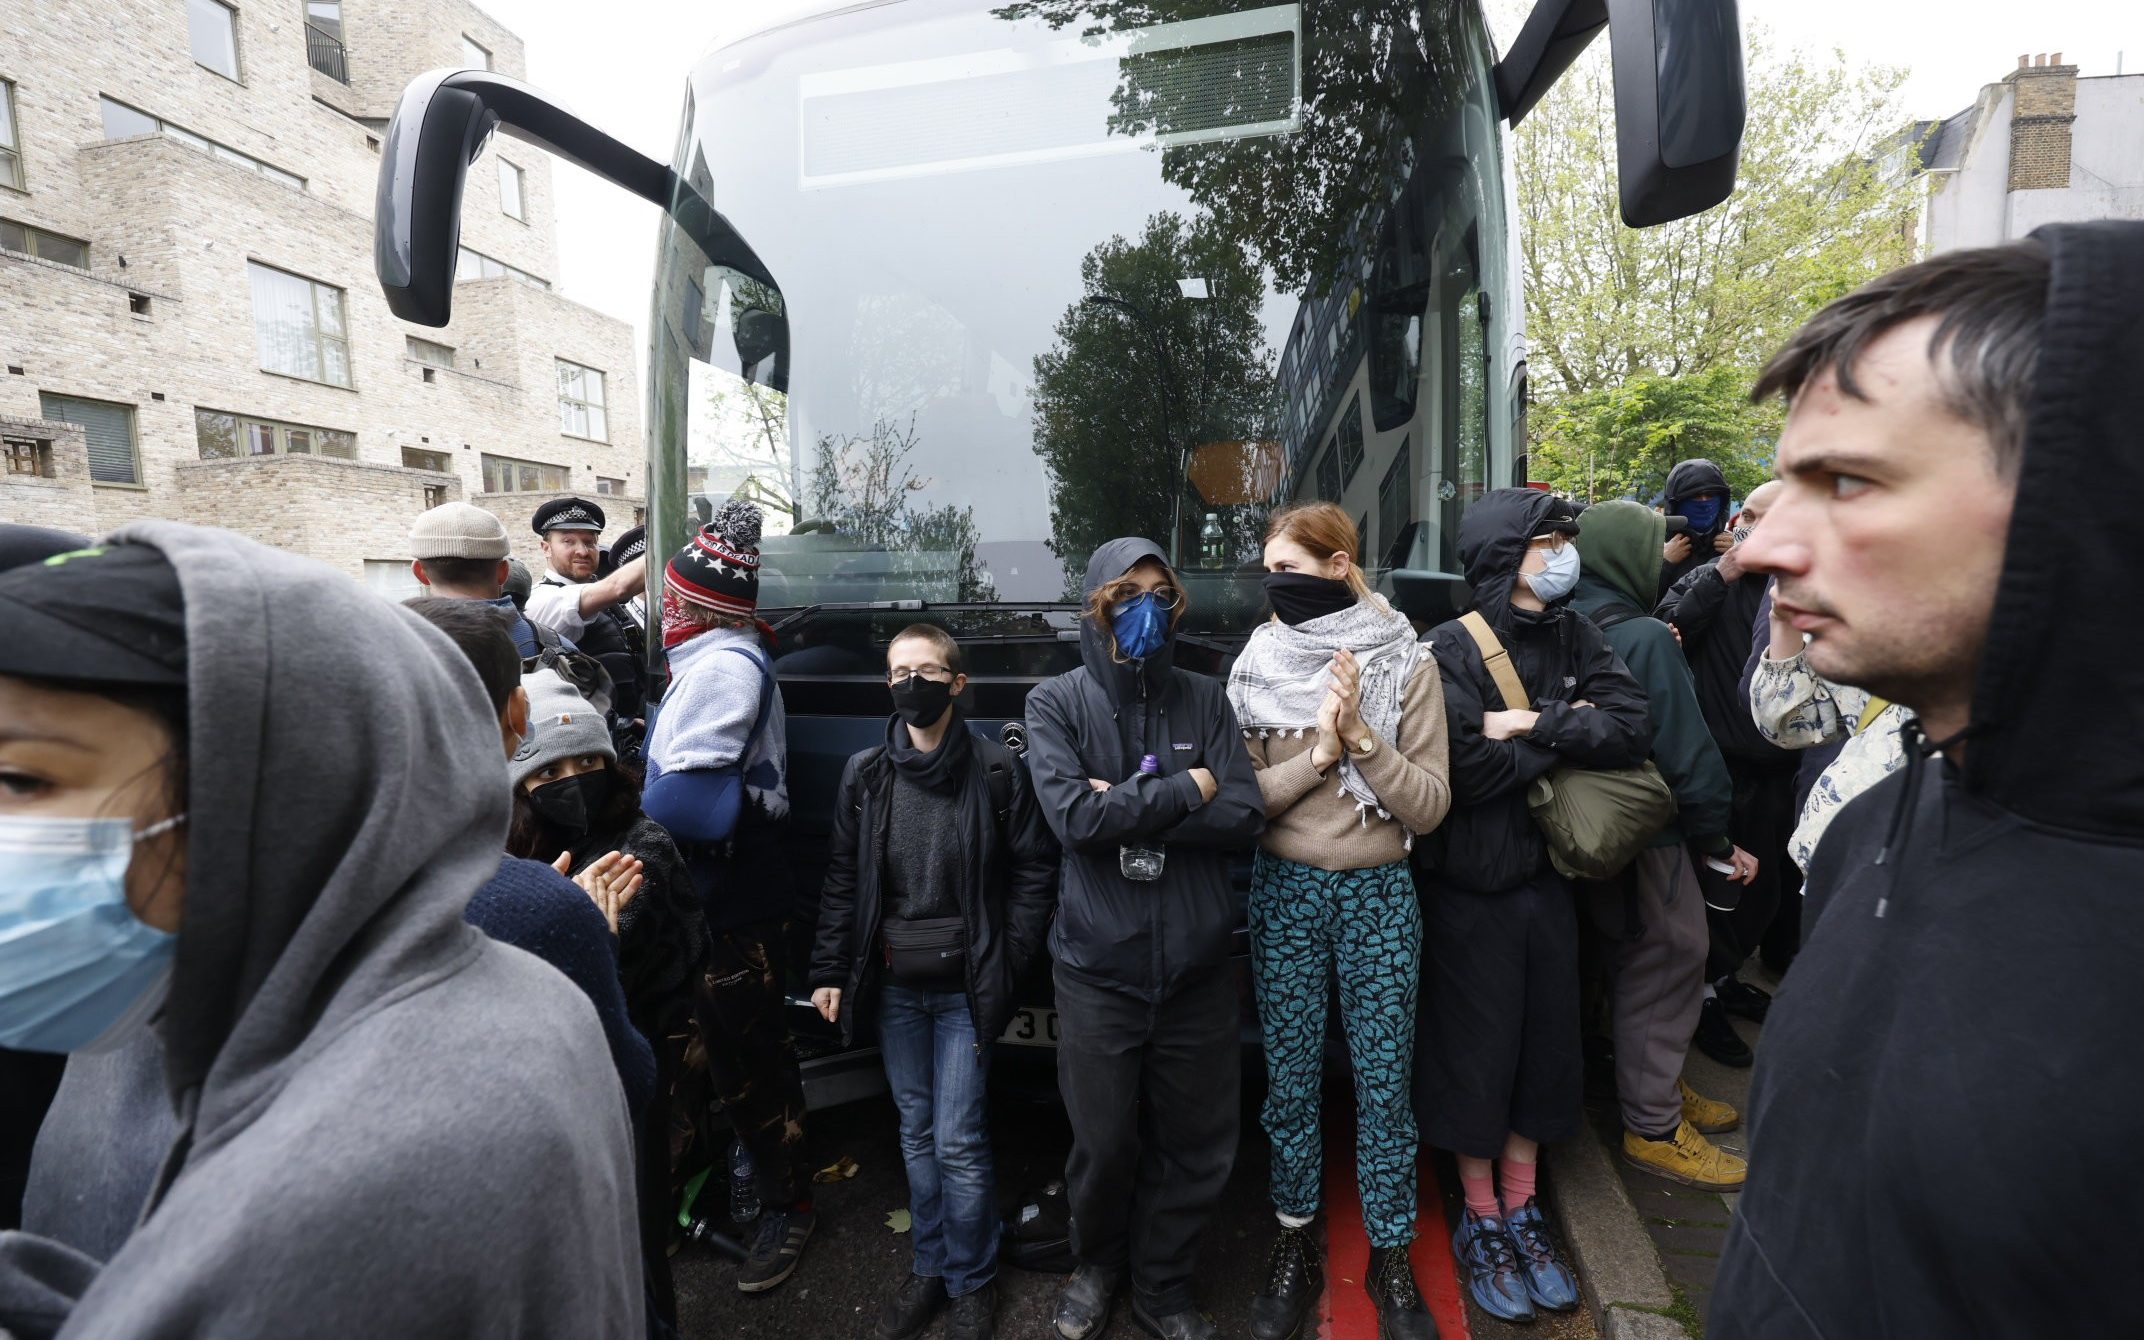 bus leaves peckham without migrants after protesters disrupt removal